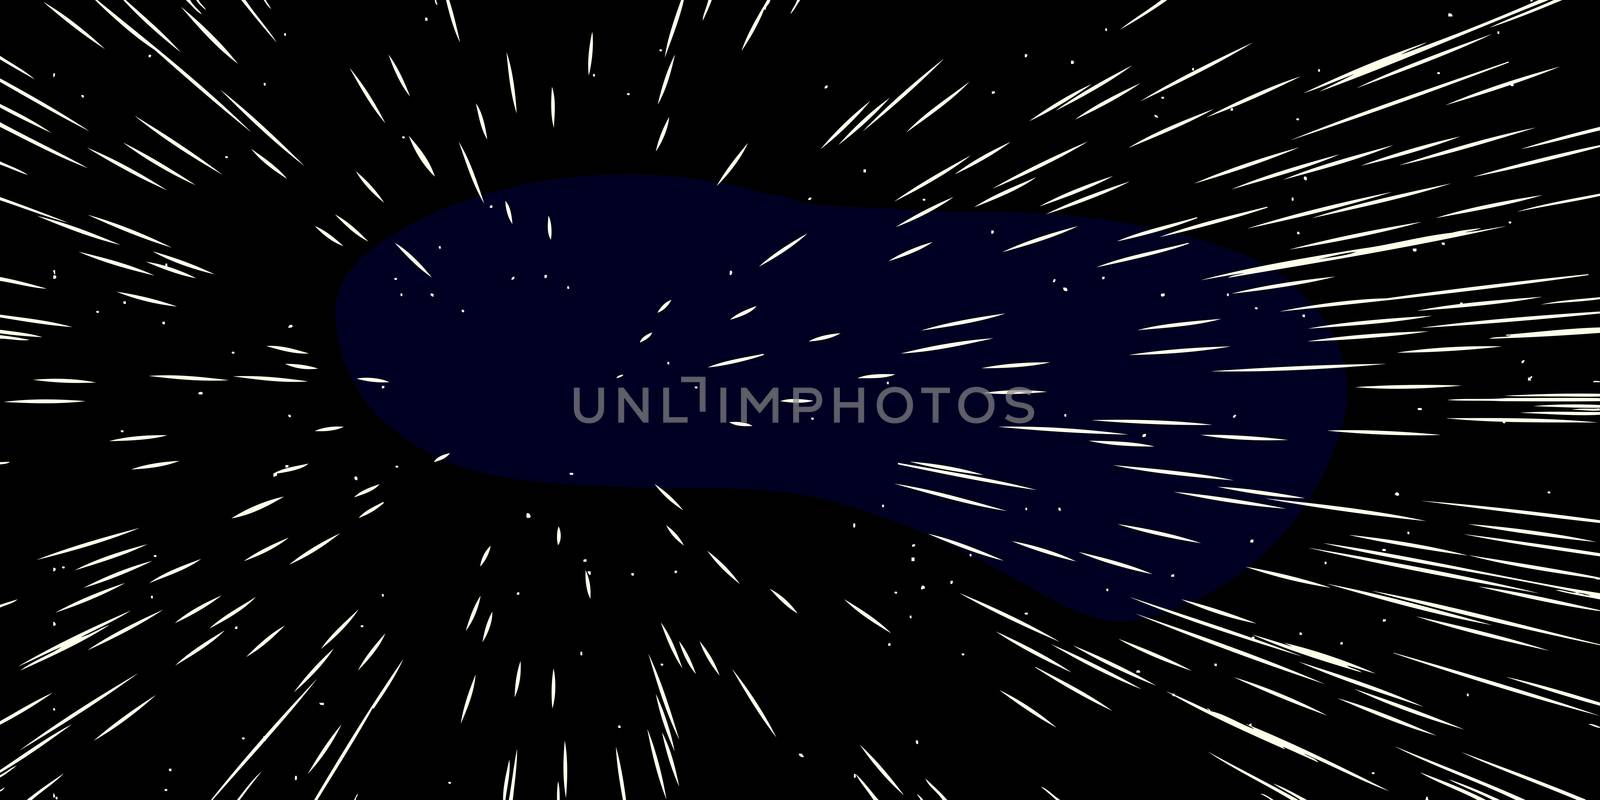 Background cartoon illustration of fast moving stars in space